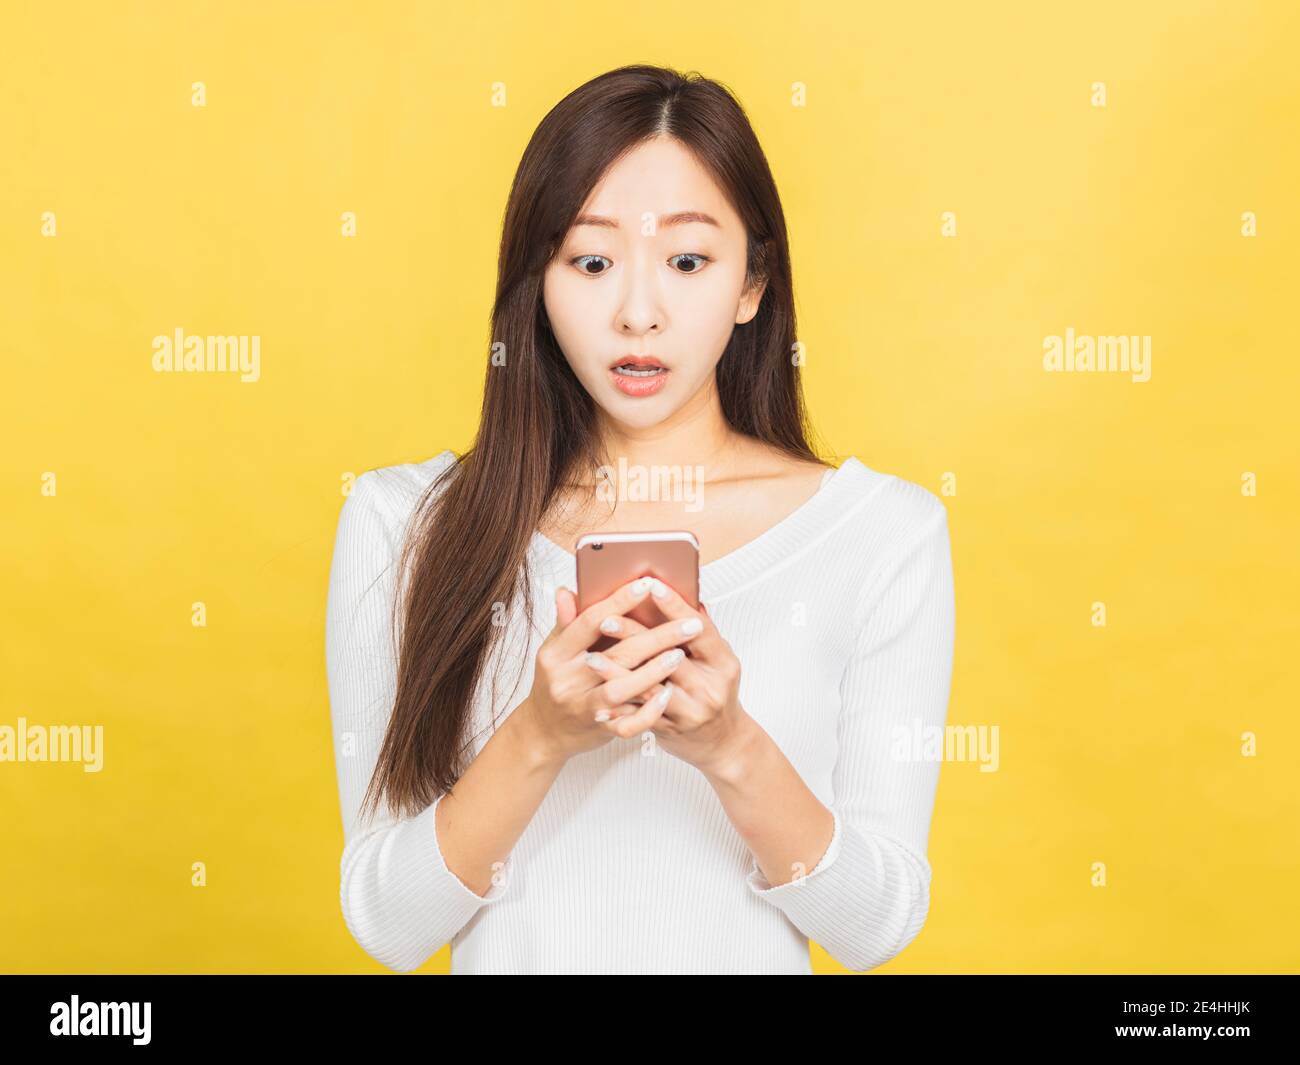 shocked young woman looking at mobile phone Stock Photo